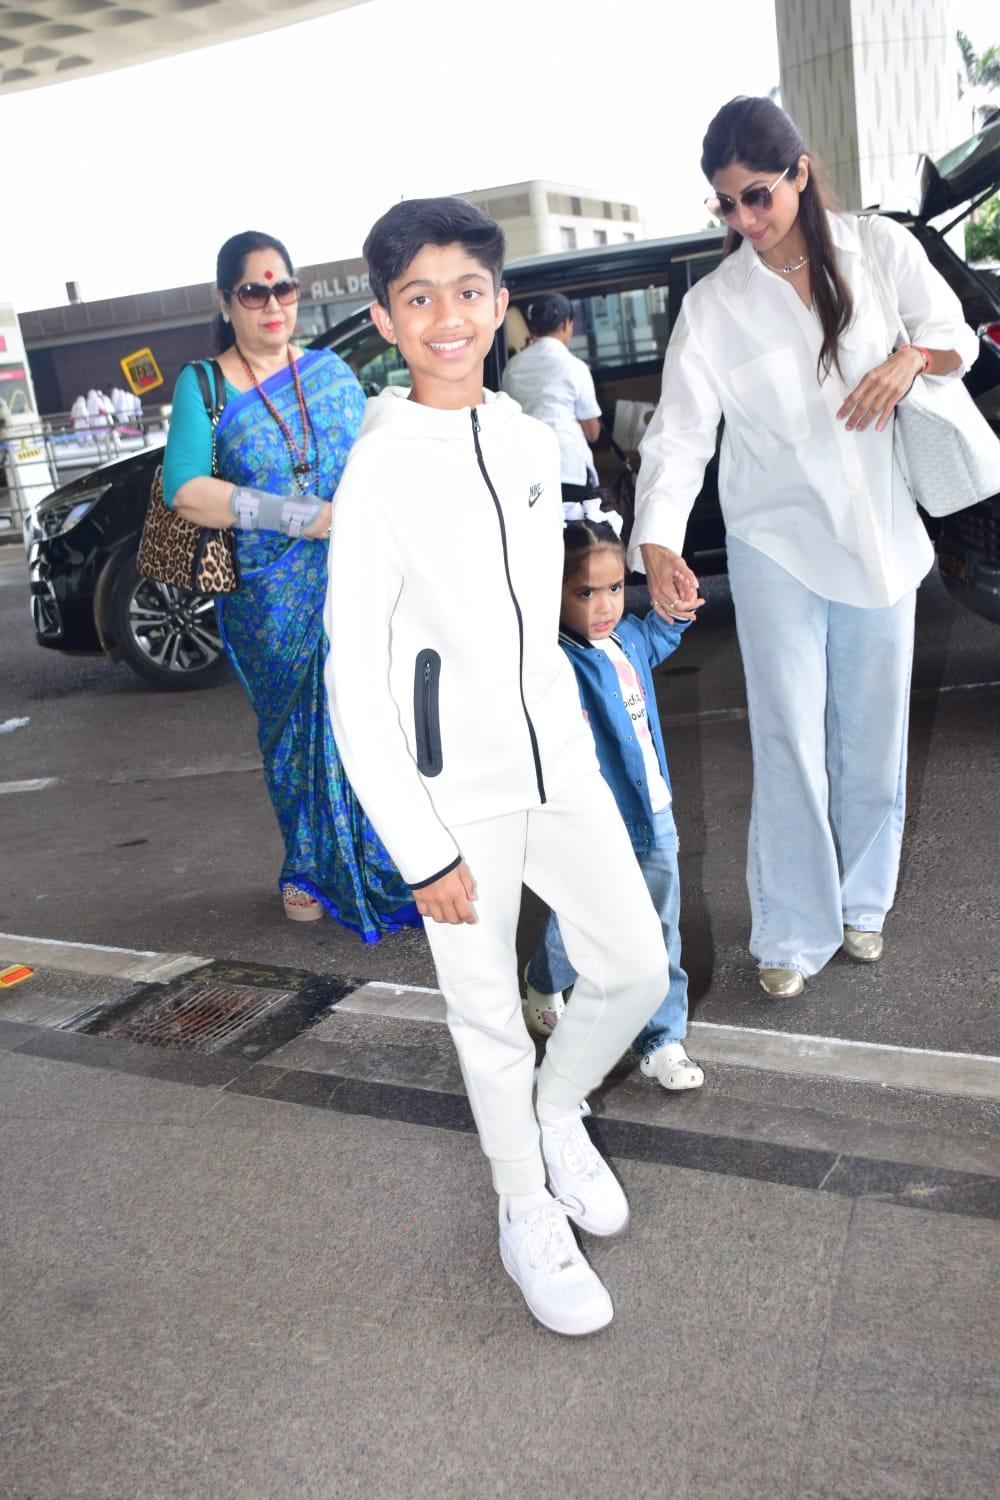 Shilpa Shetty was spotted at the Mumbai airport with her kids and mother